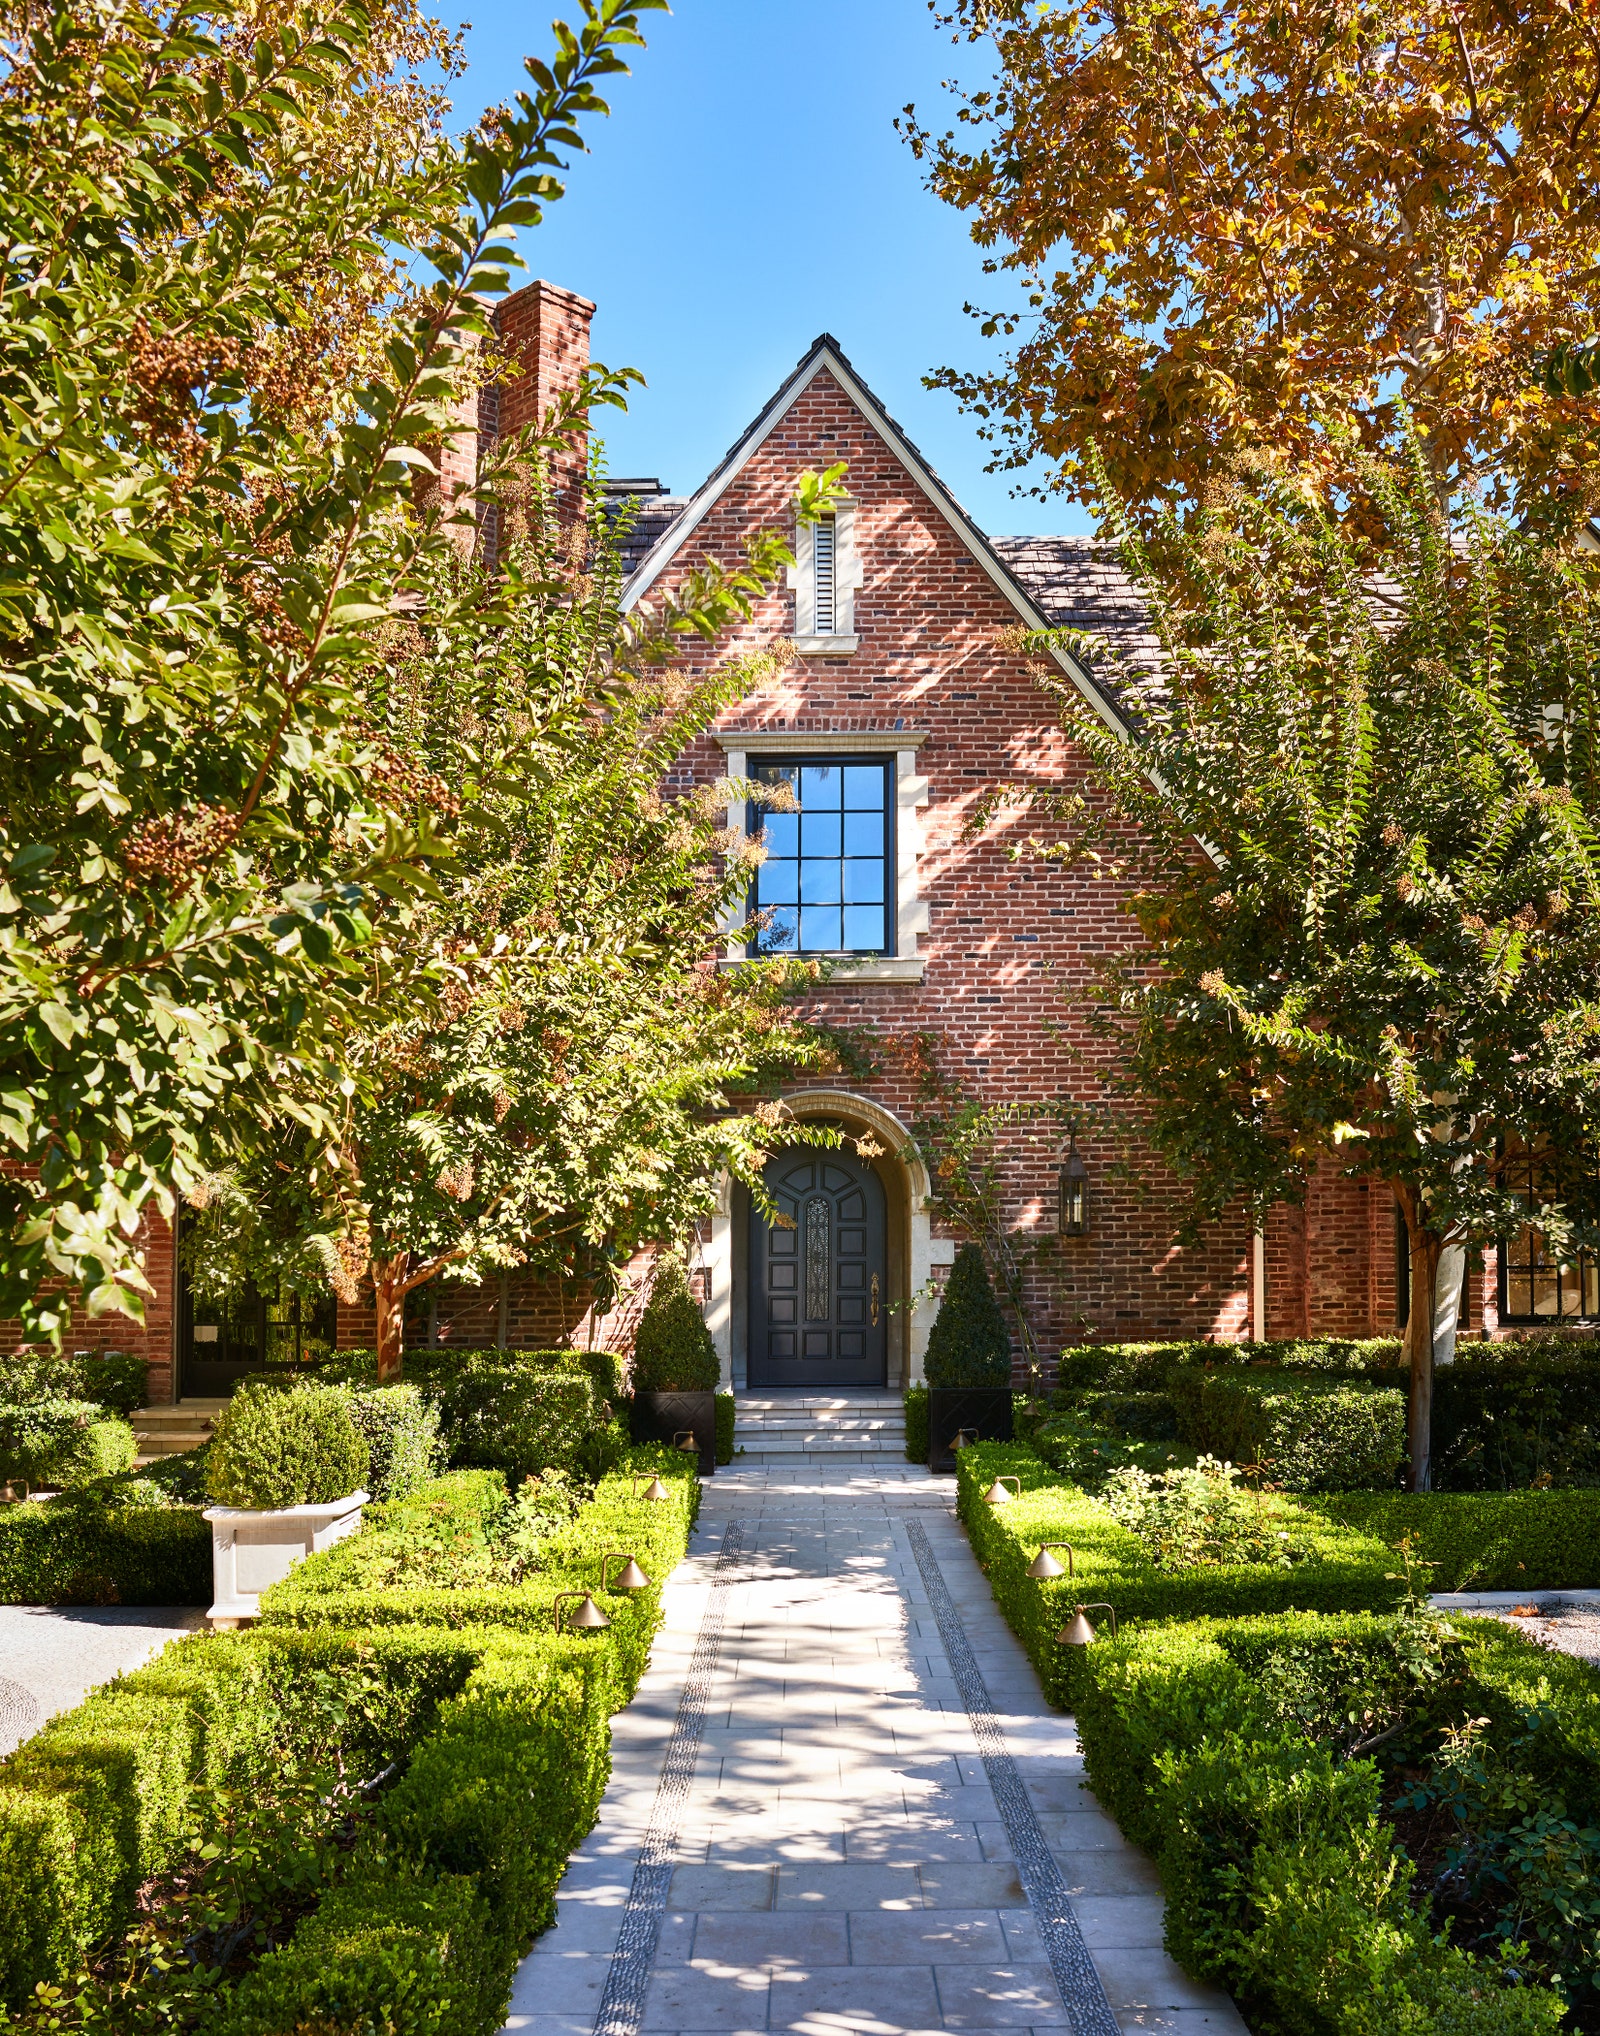 an-amazing-redesign-of-californian-1925-tudor-by-nate-berkus-and-Jeremiah-brent